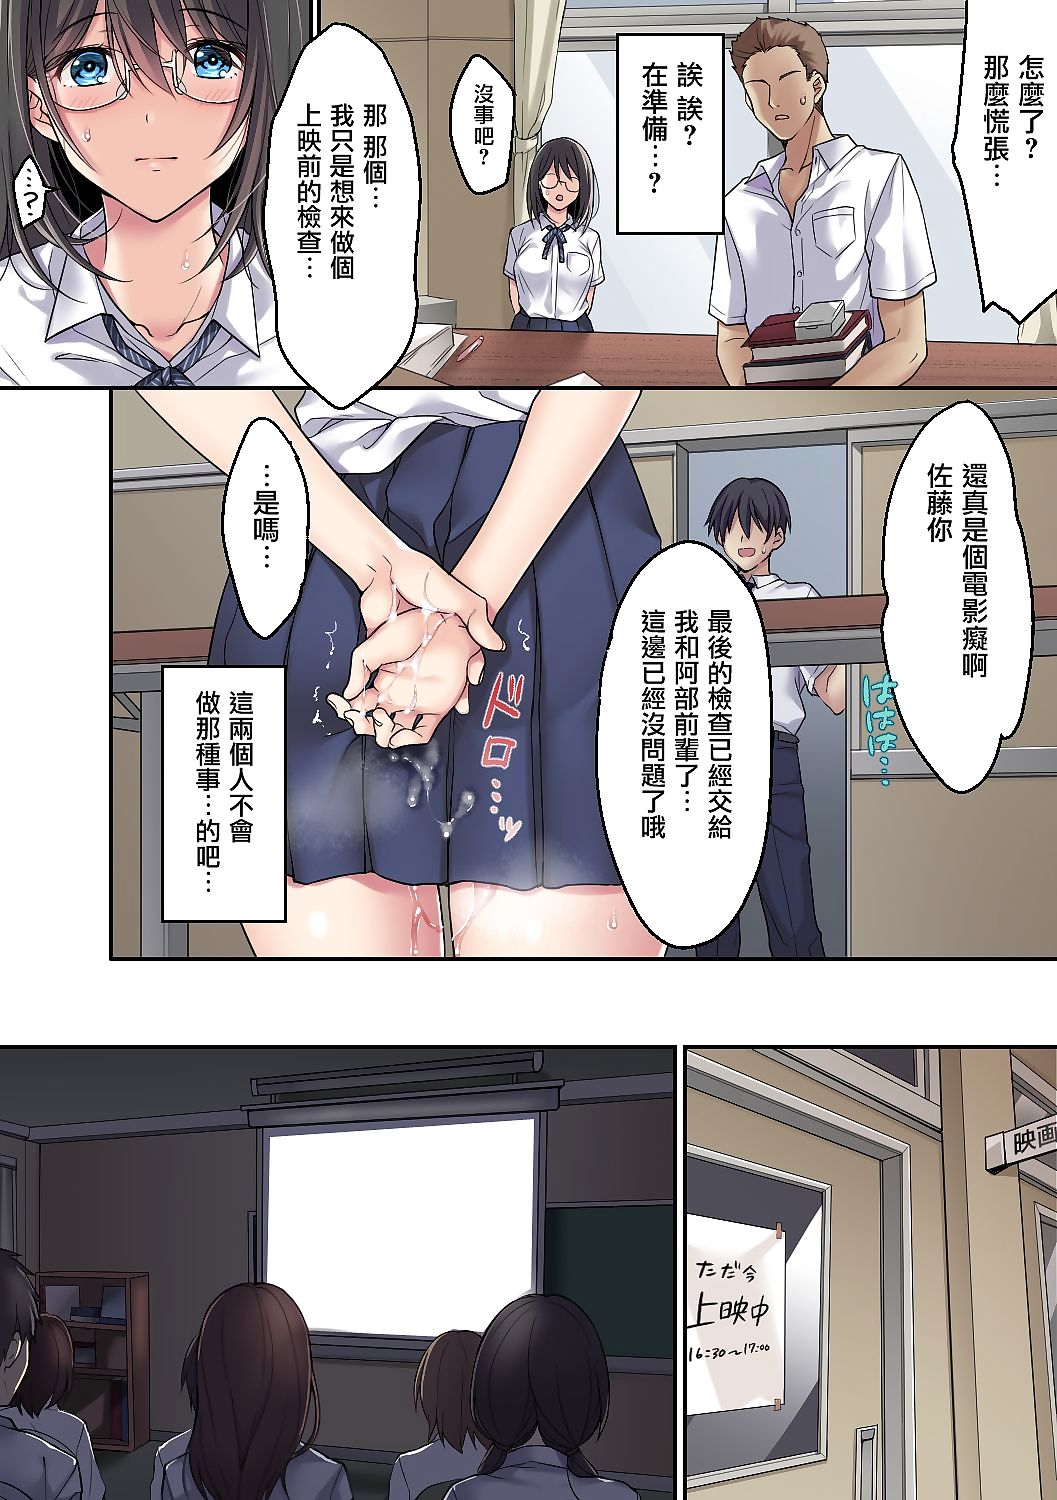 kanojo geen page 1